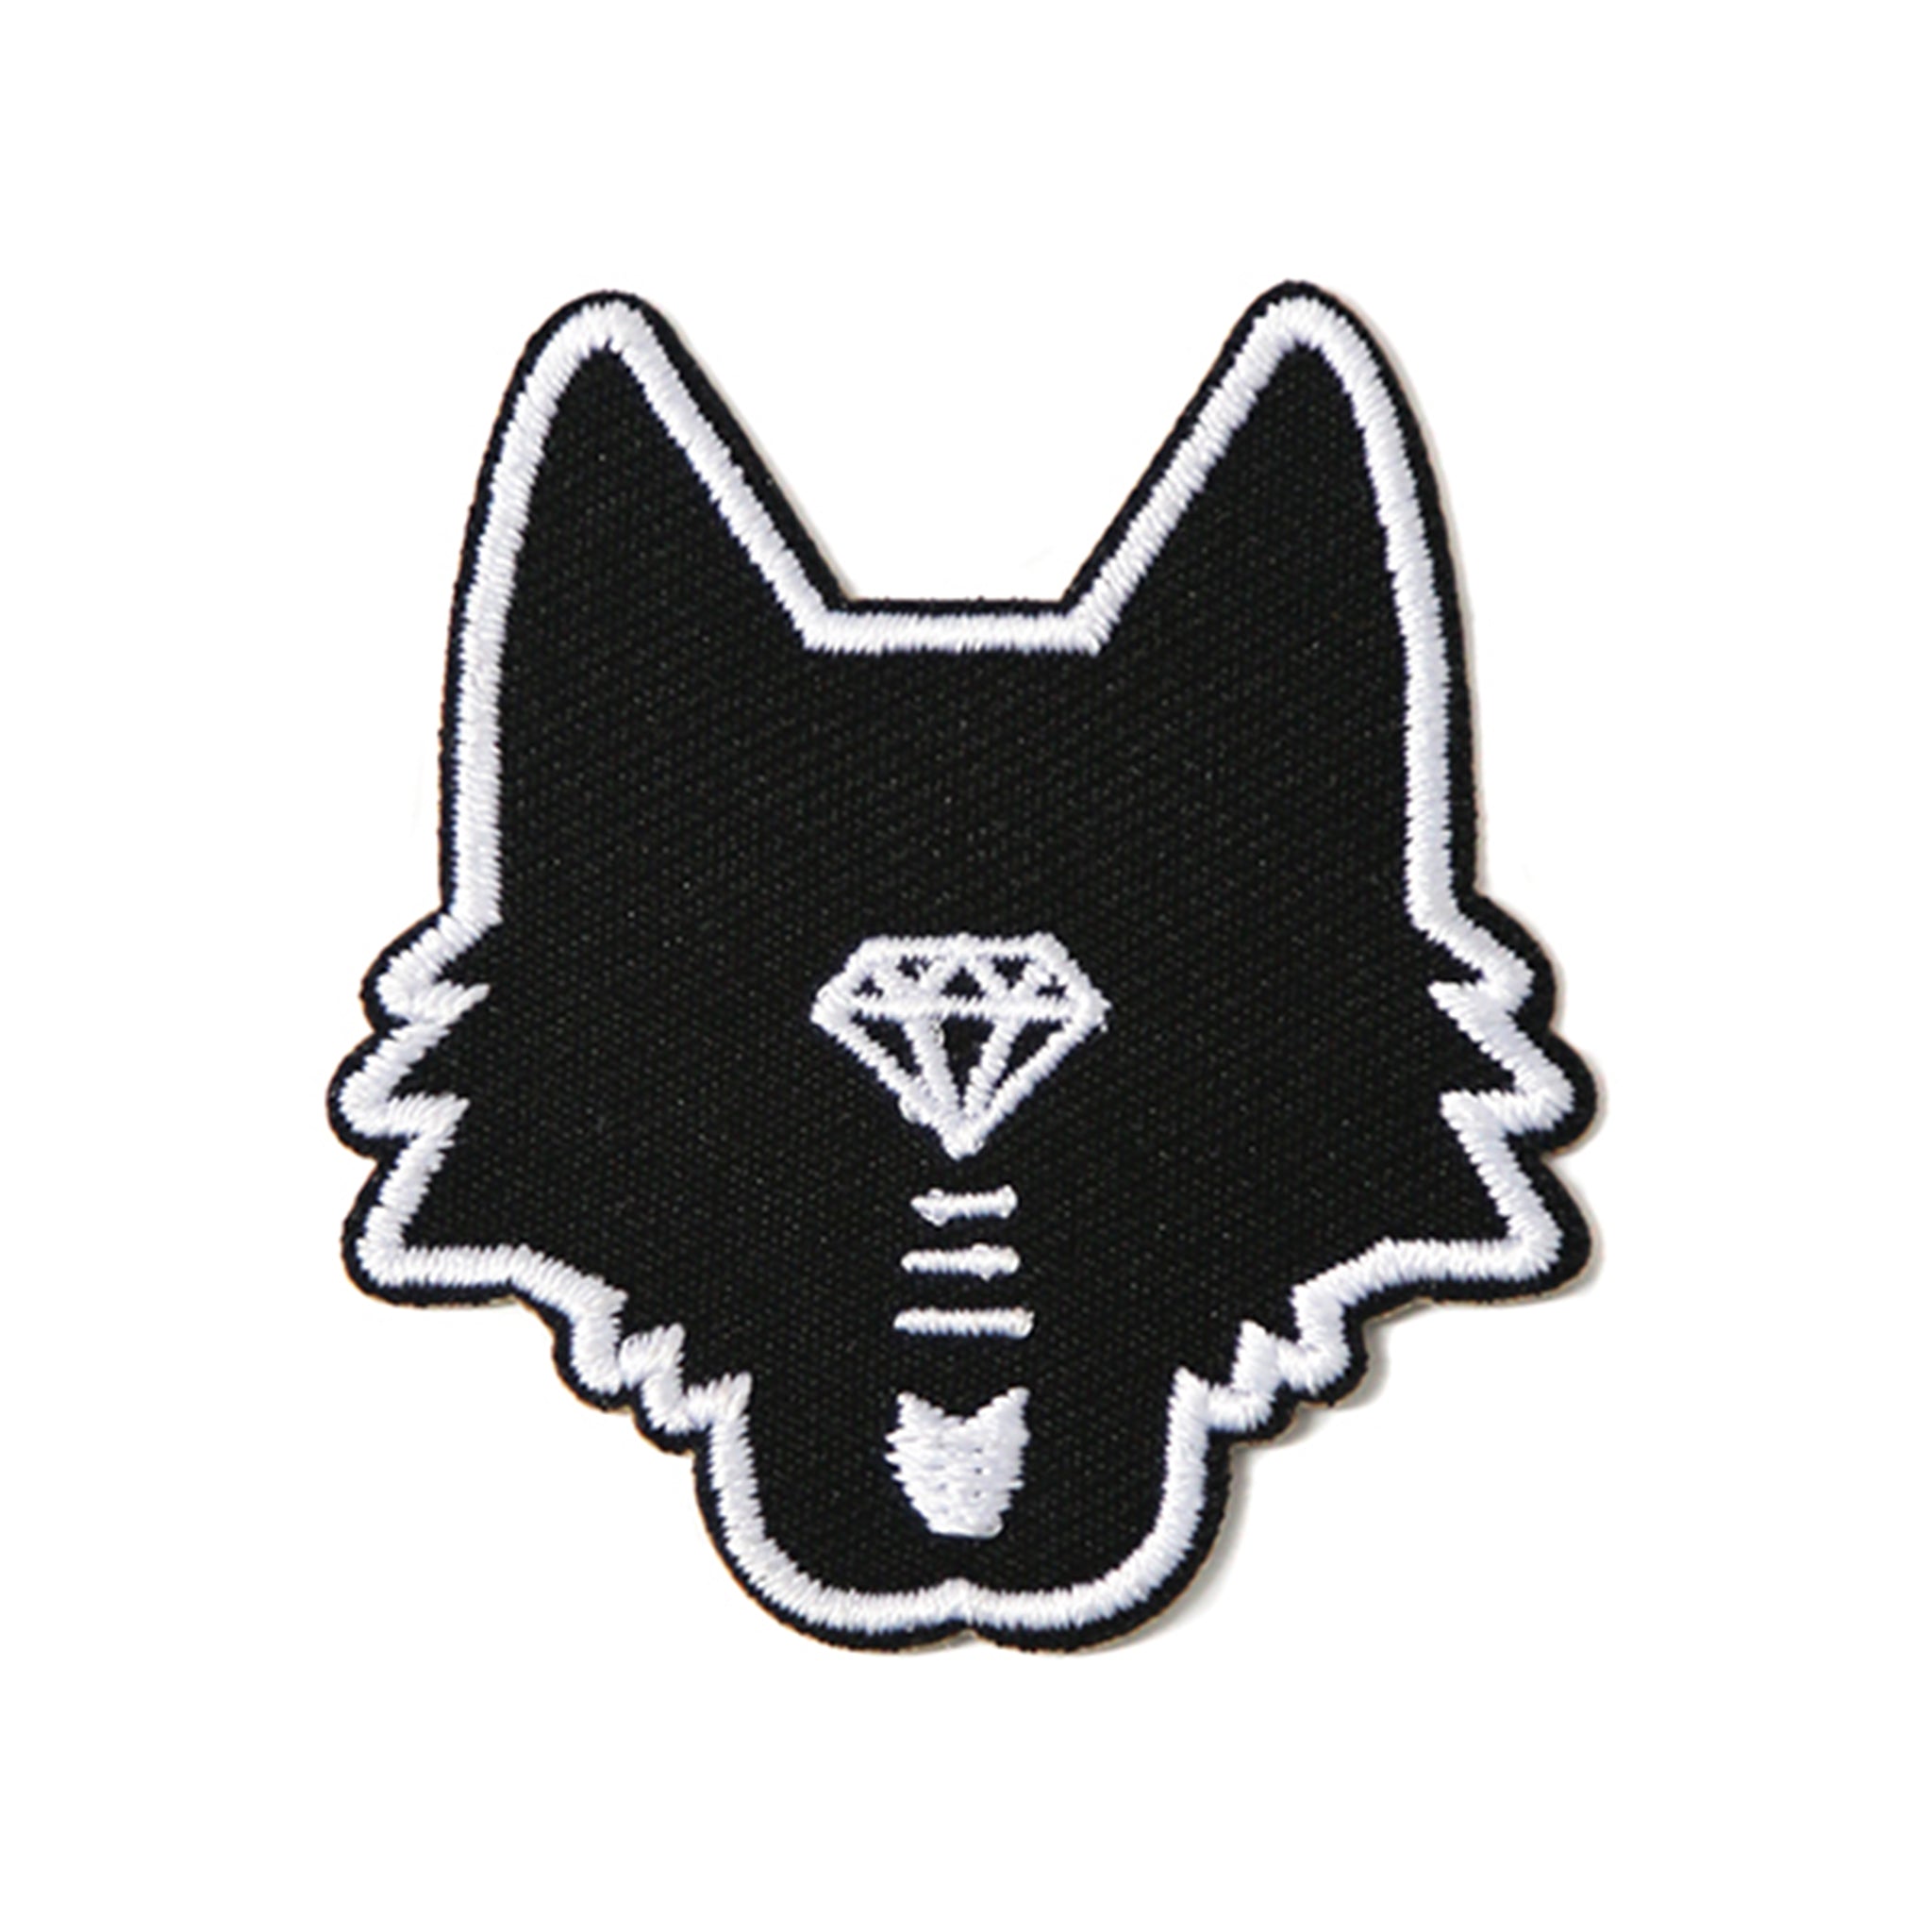 Pgy 30 Design Small Animal Wolf Head Patchwork Patch Embroidered